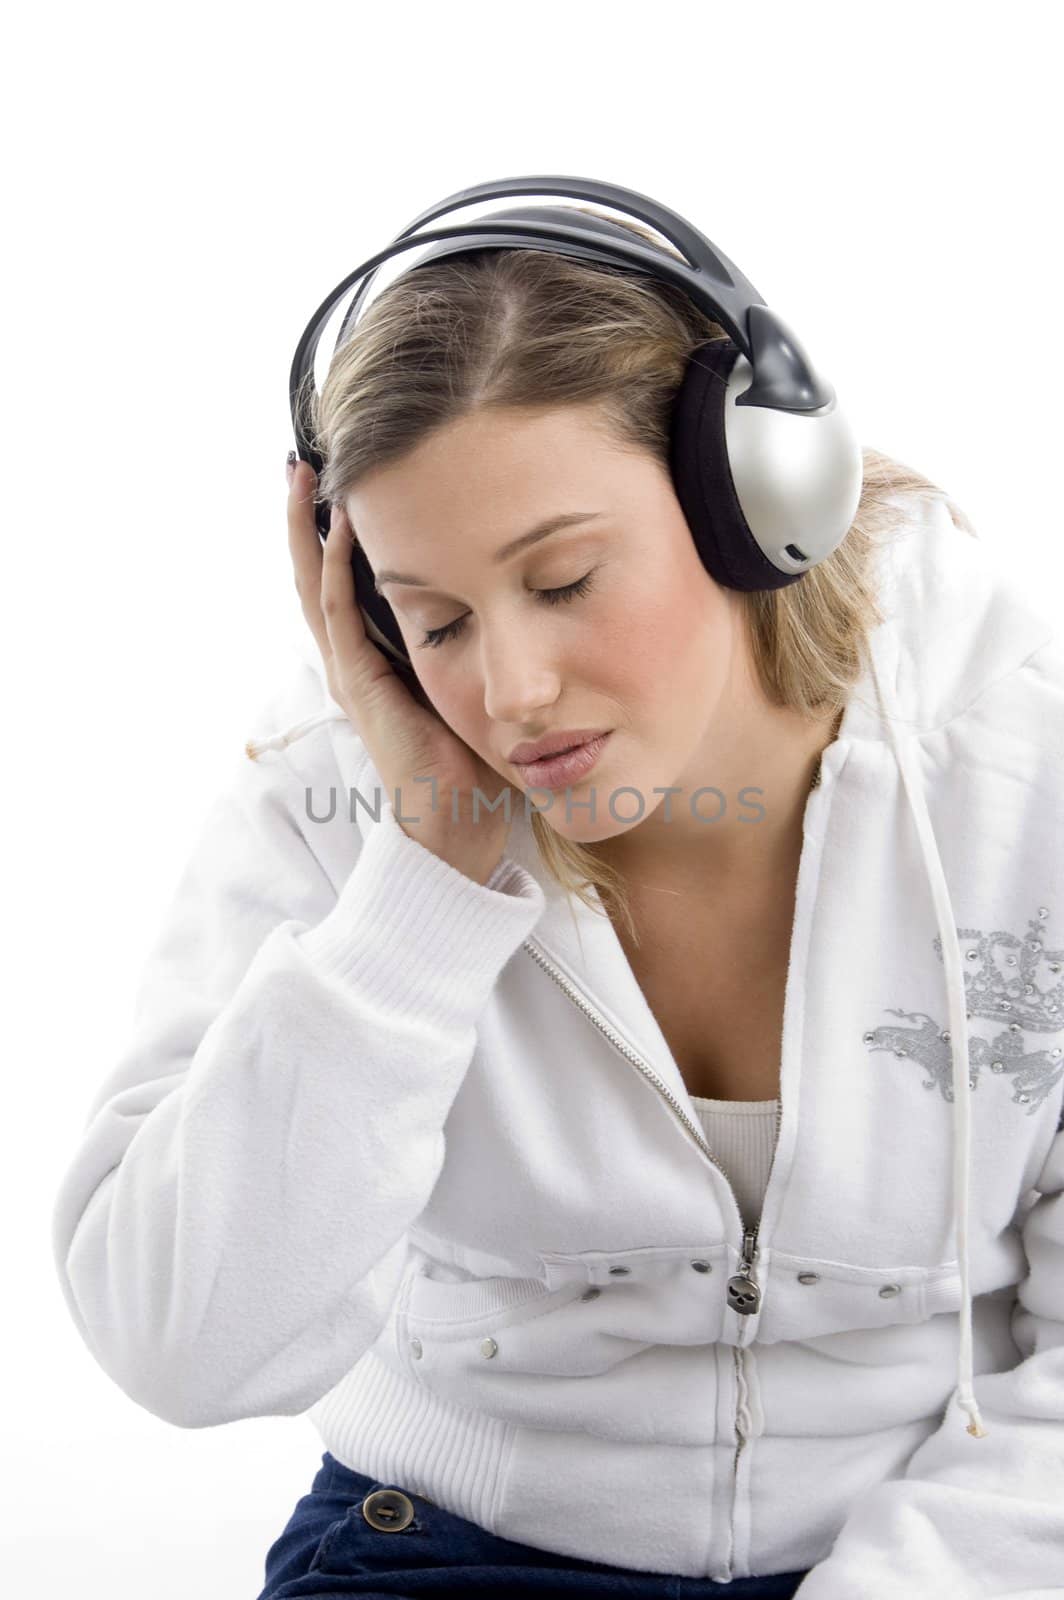 woman listening to music with closed eyes by imagerymajestic